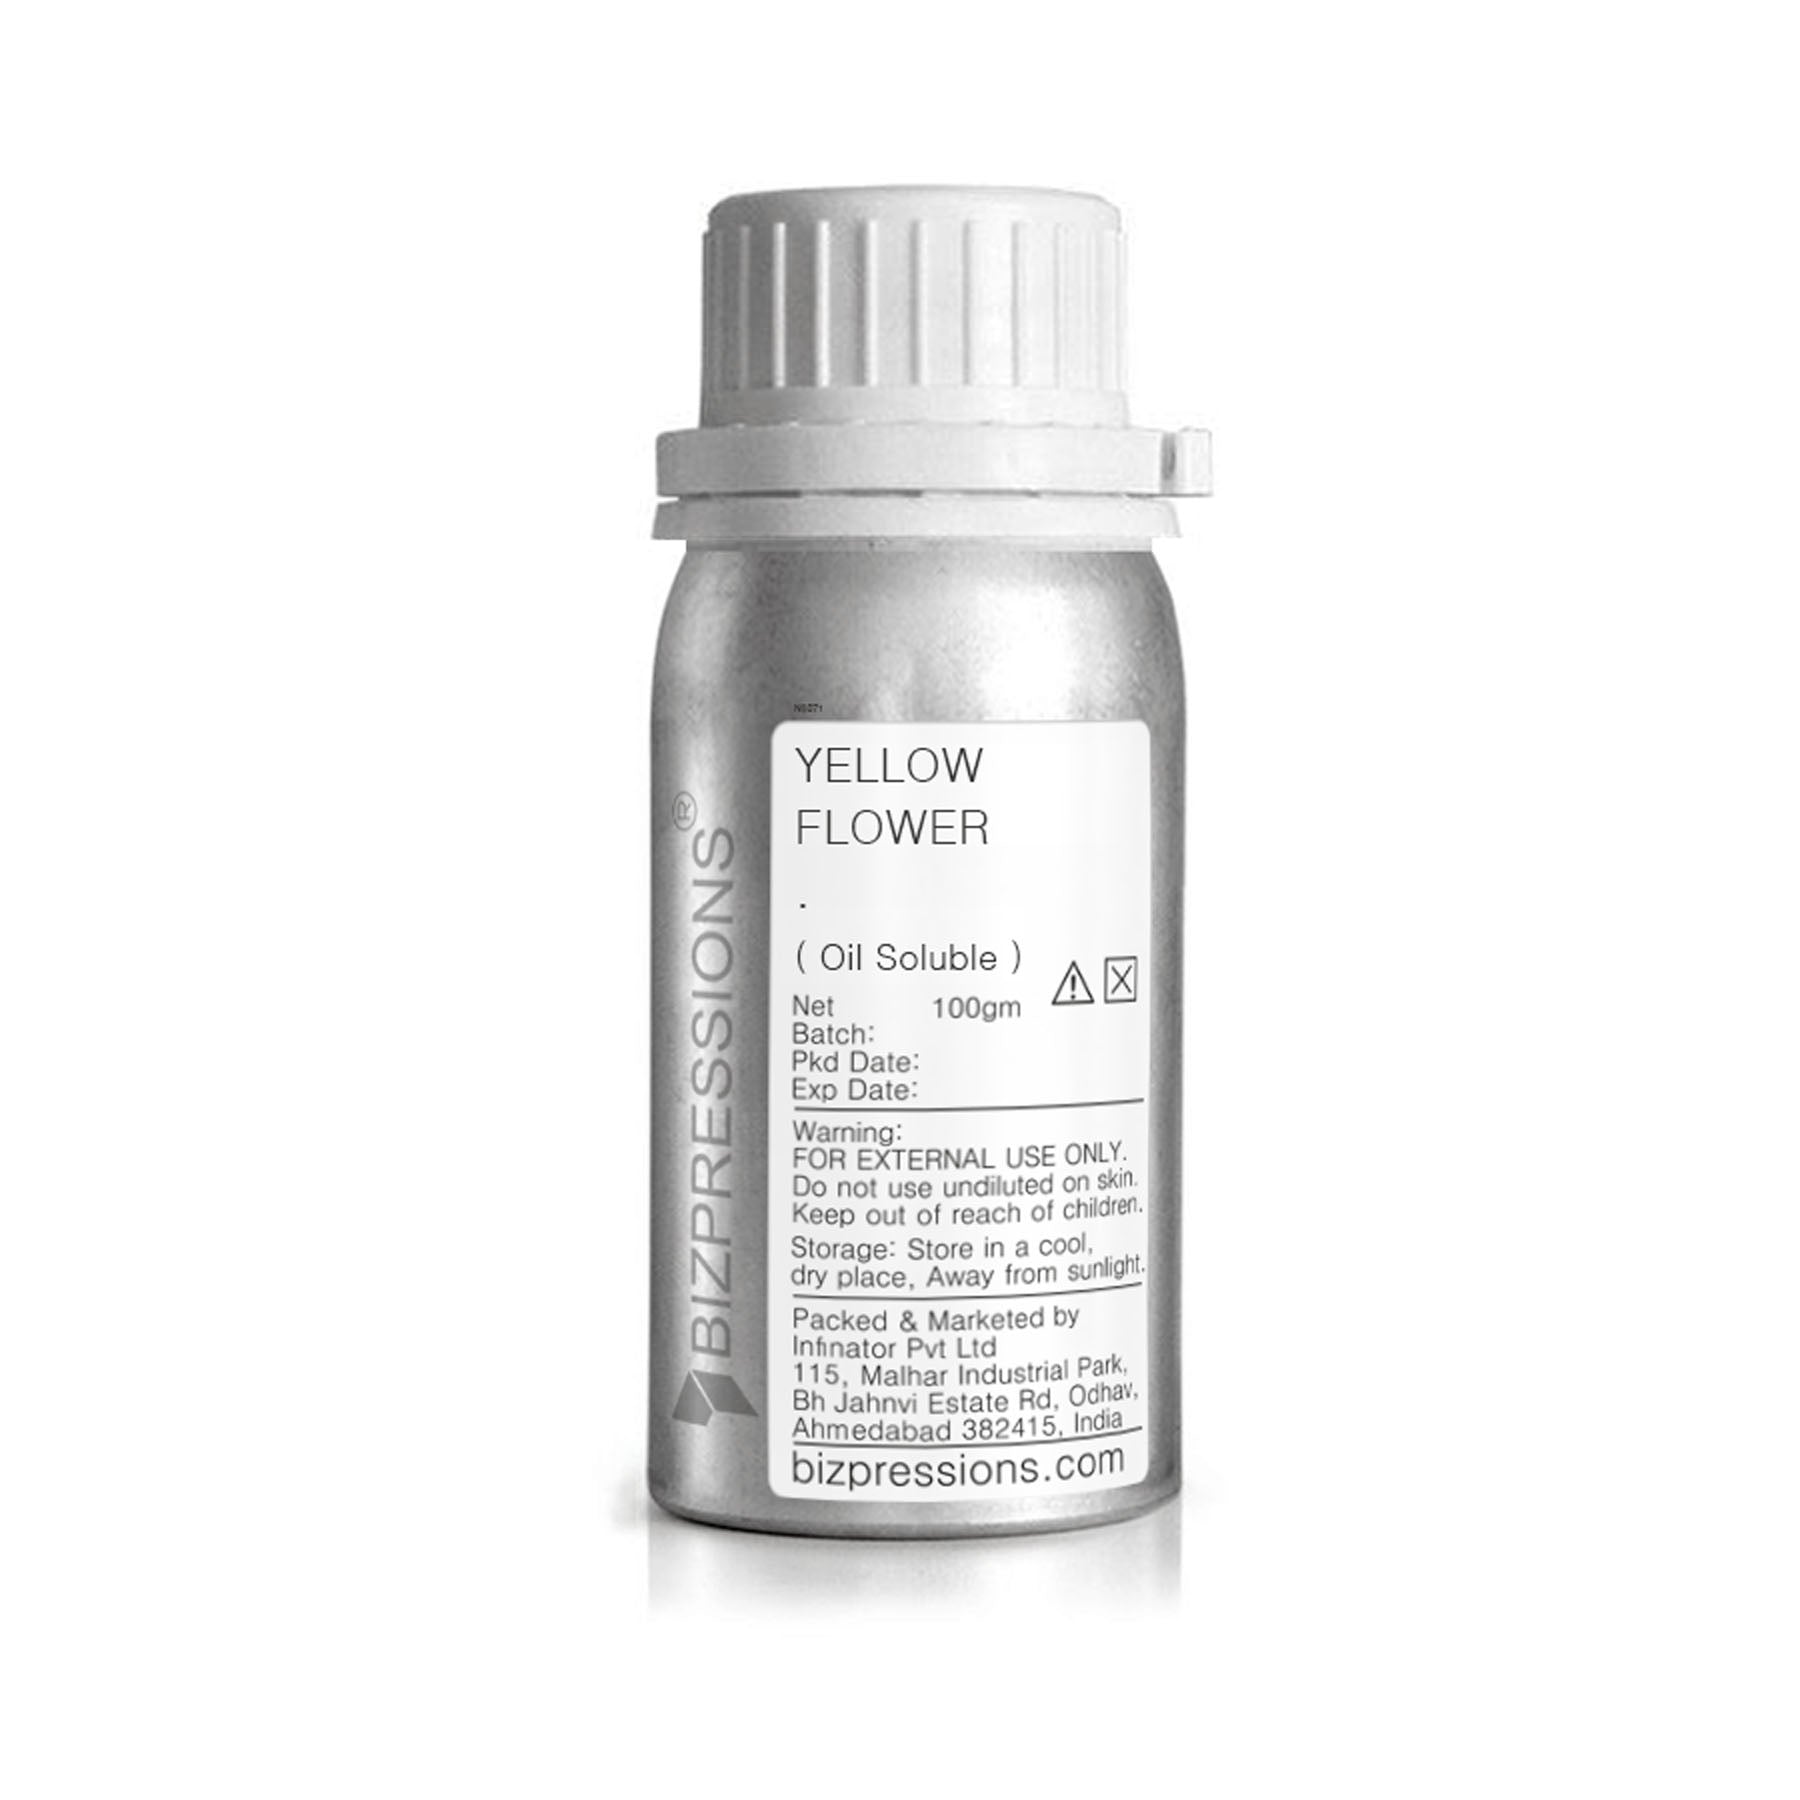 YELLOW FLOWER - Fragrance ( Oil Soluble ) - 100 gm